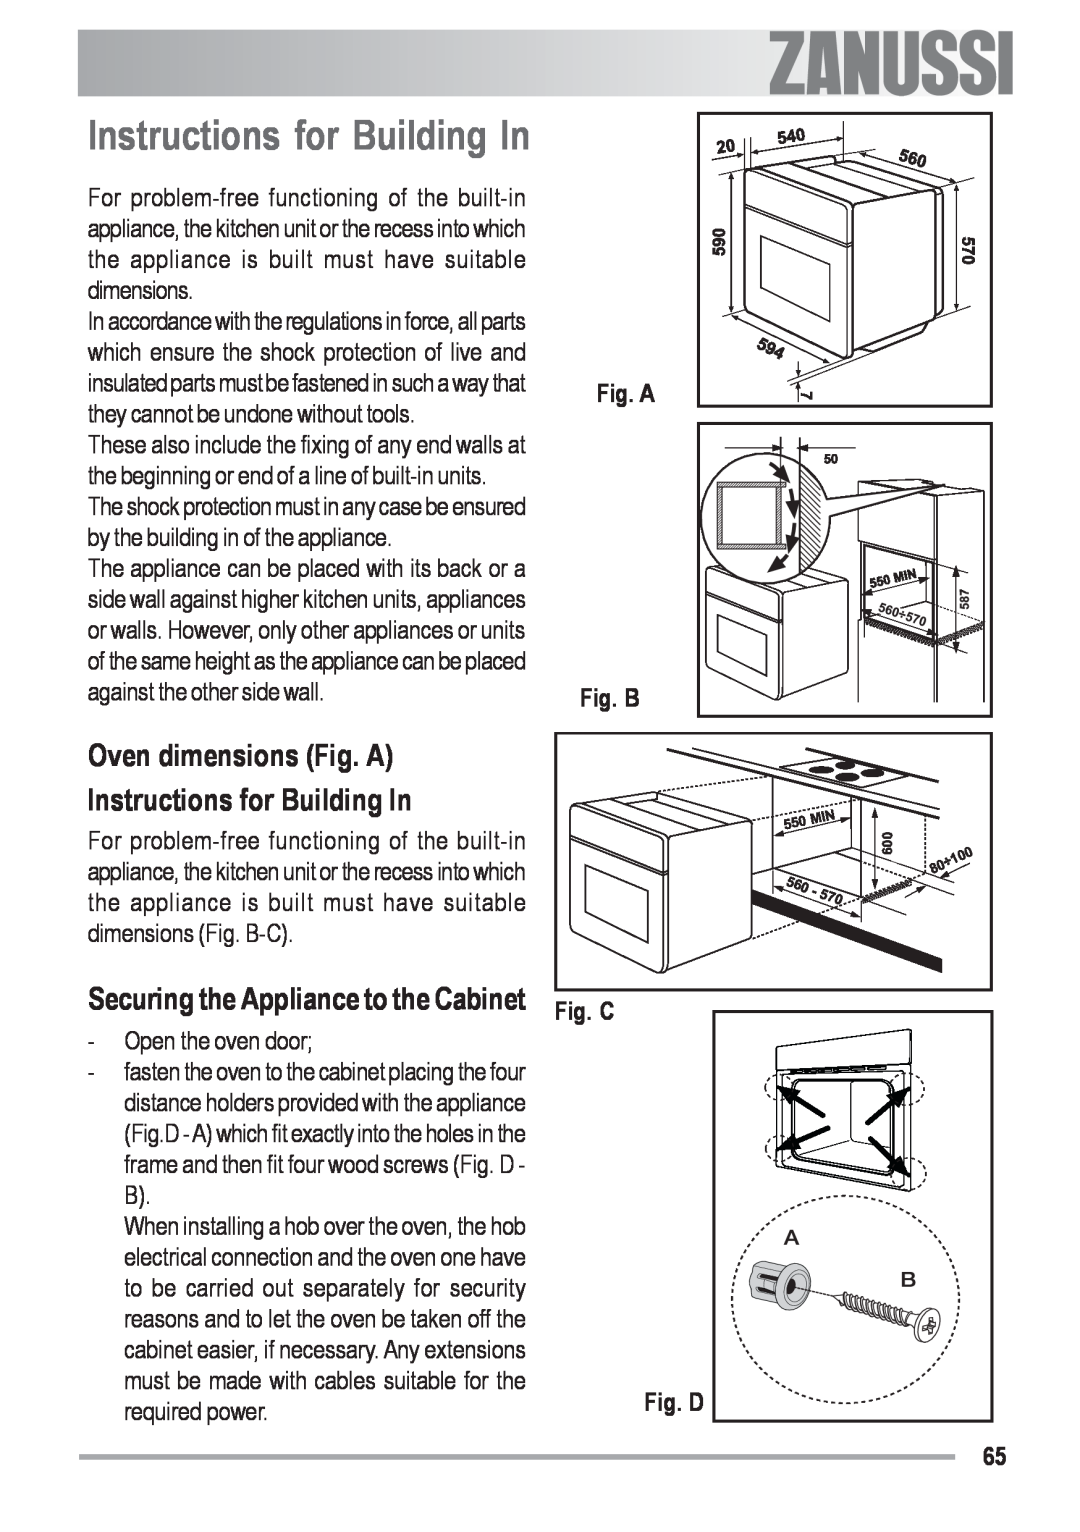 Zanussi ZOB 590 Oven dimensions Fig. A Instructions for Building In, Fig. A Fig. B, Securing the Appliance to the Cabinet 